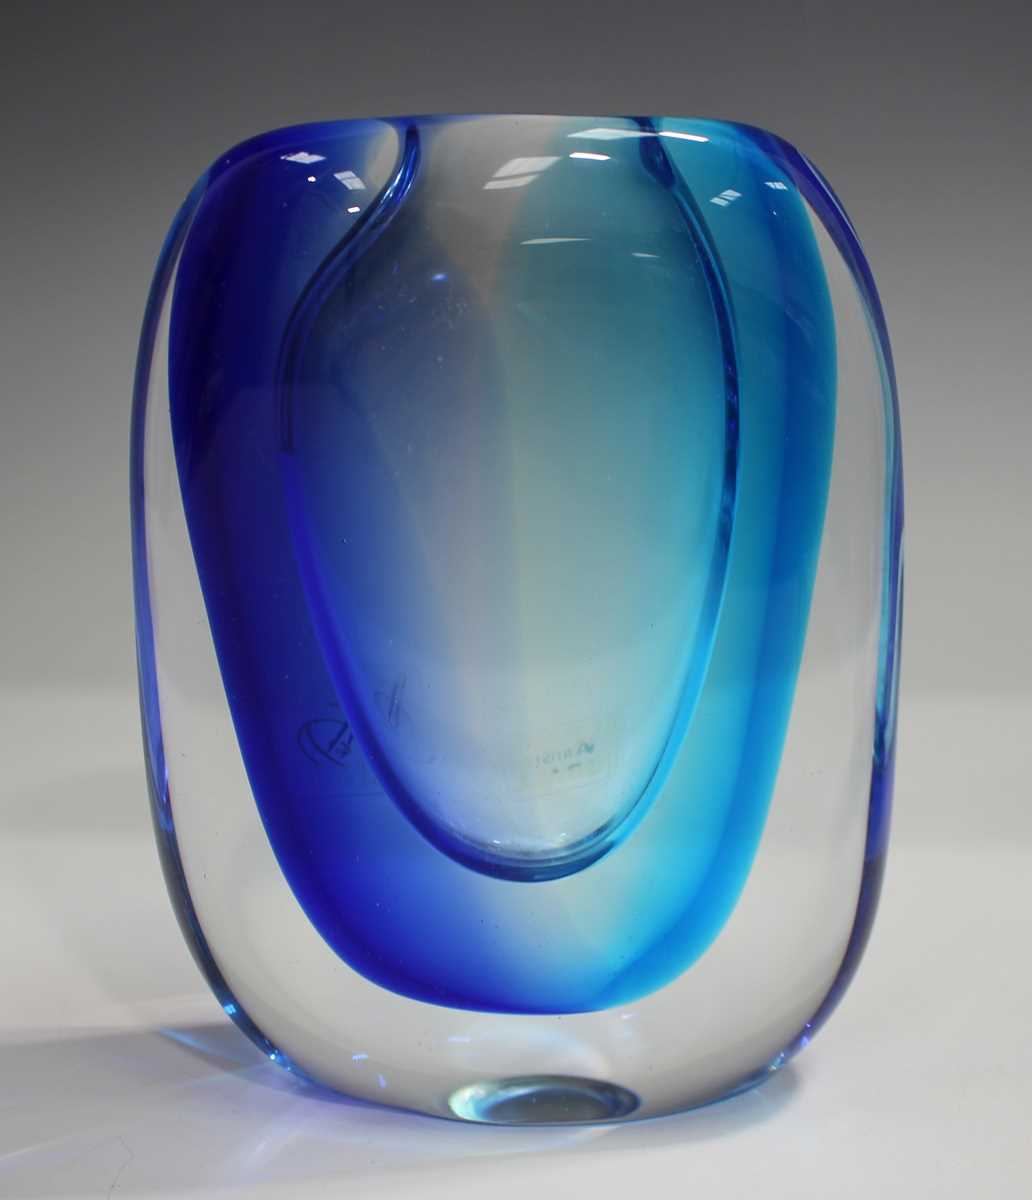 Two Vetreria Artistica Oball Murano sommerso glass vases, early 20th century, both of U-shape, the - Image 2 of 12